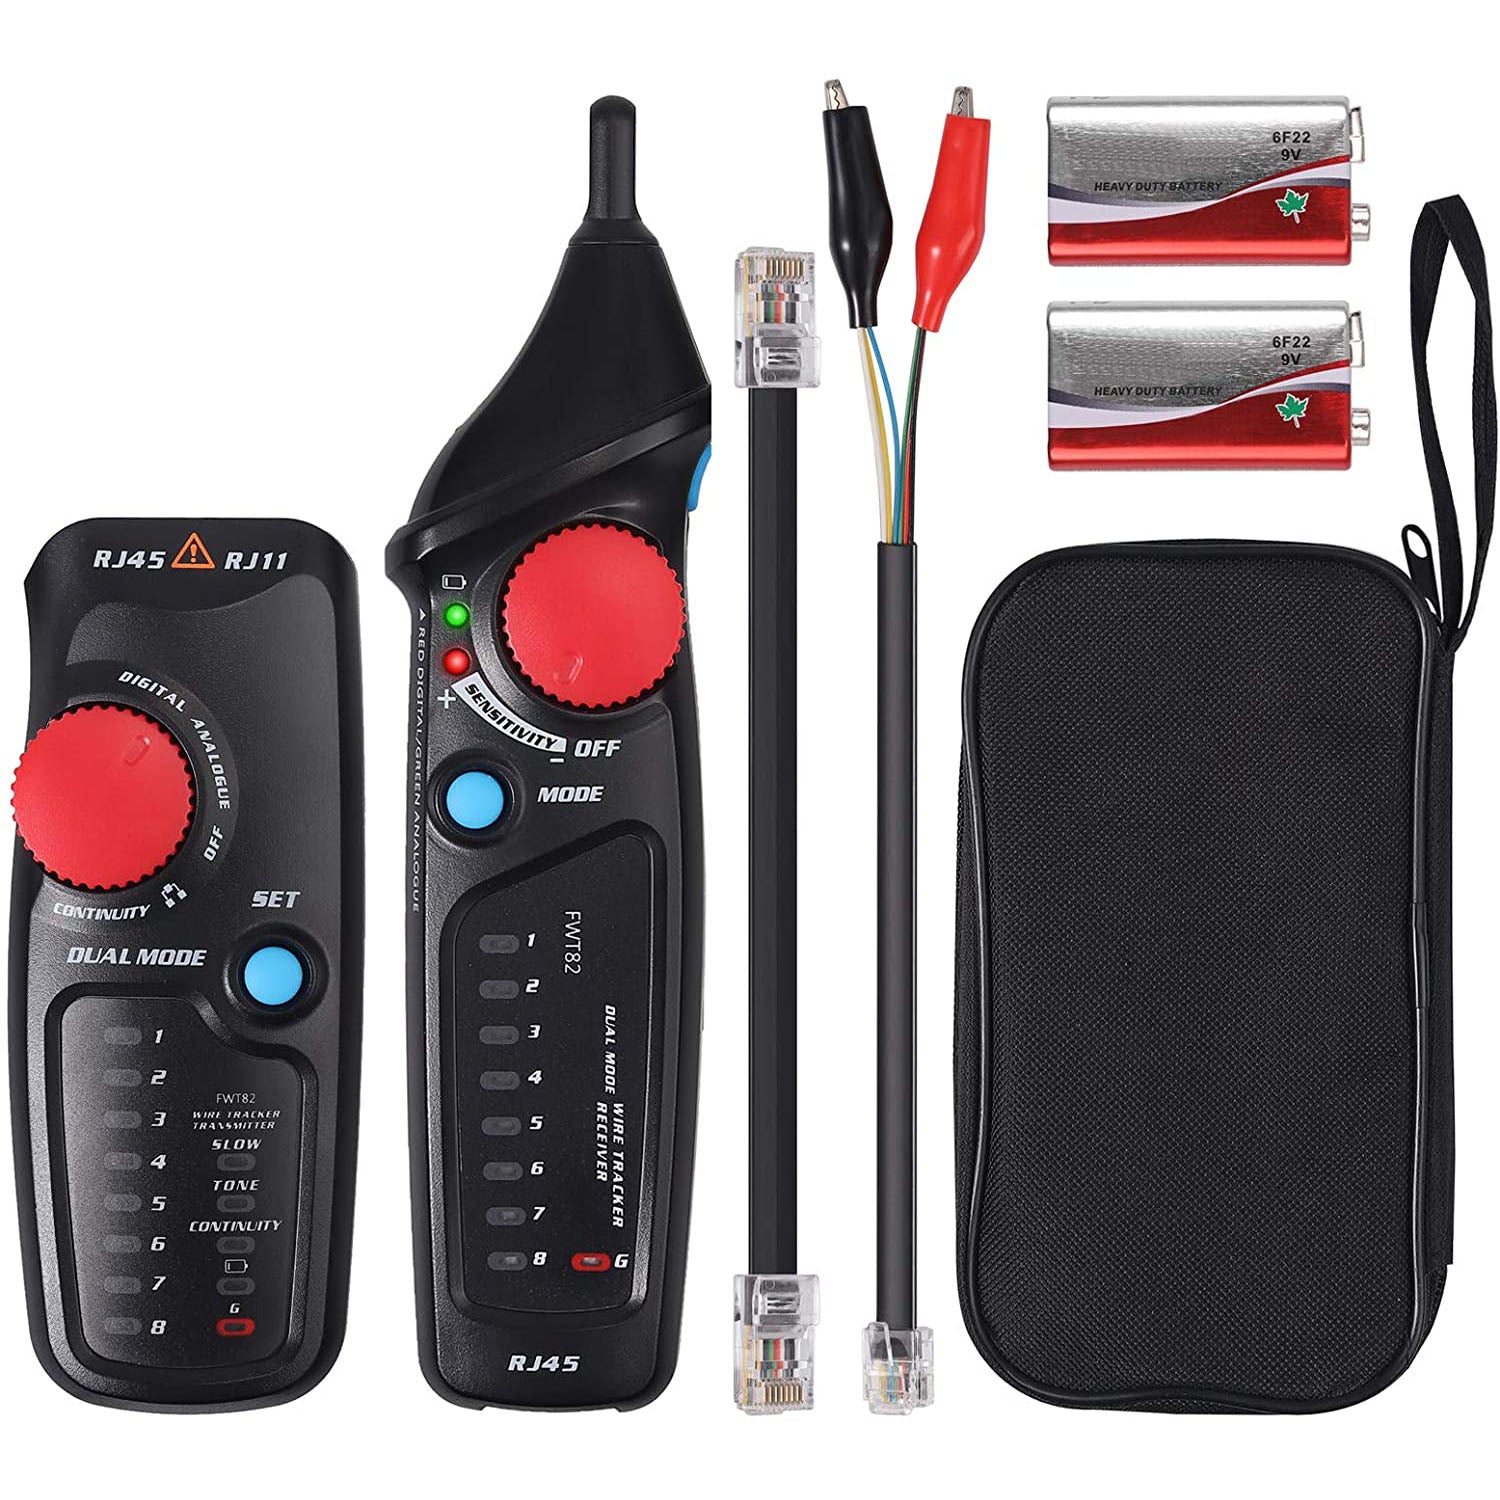 Kamtop Network Tester Dual Mode Cable Tracer